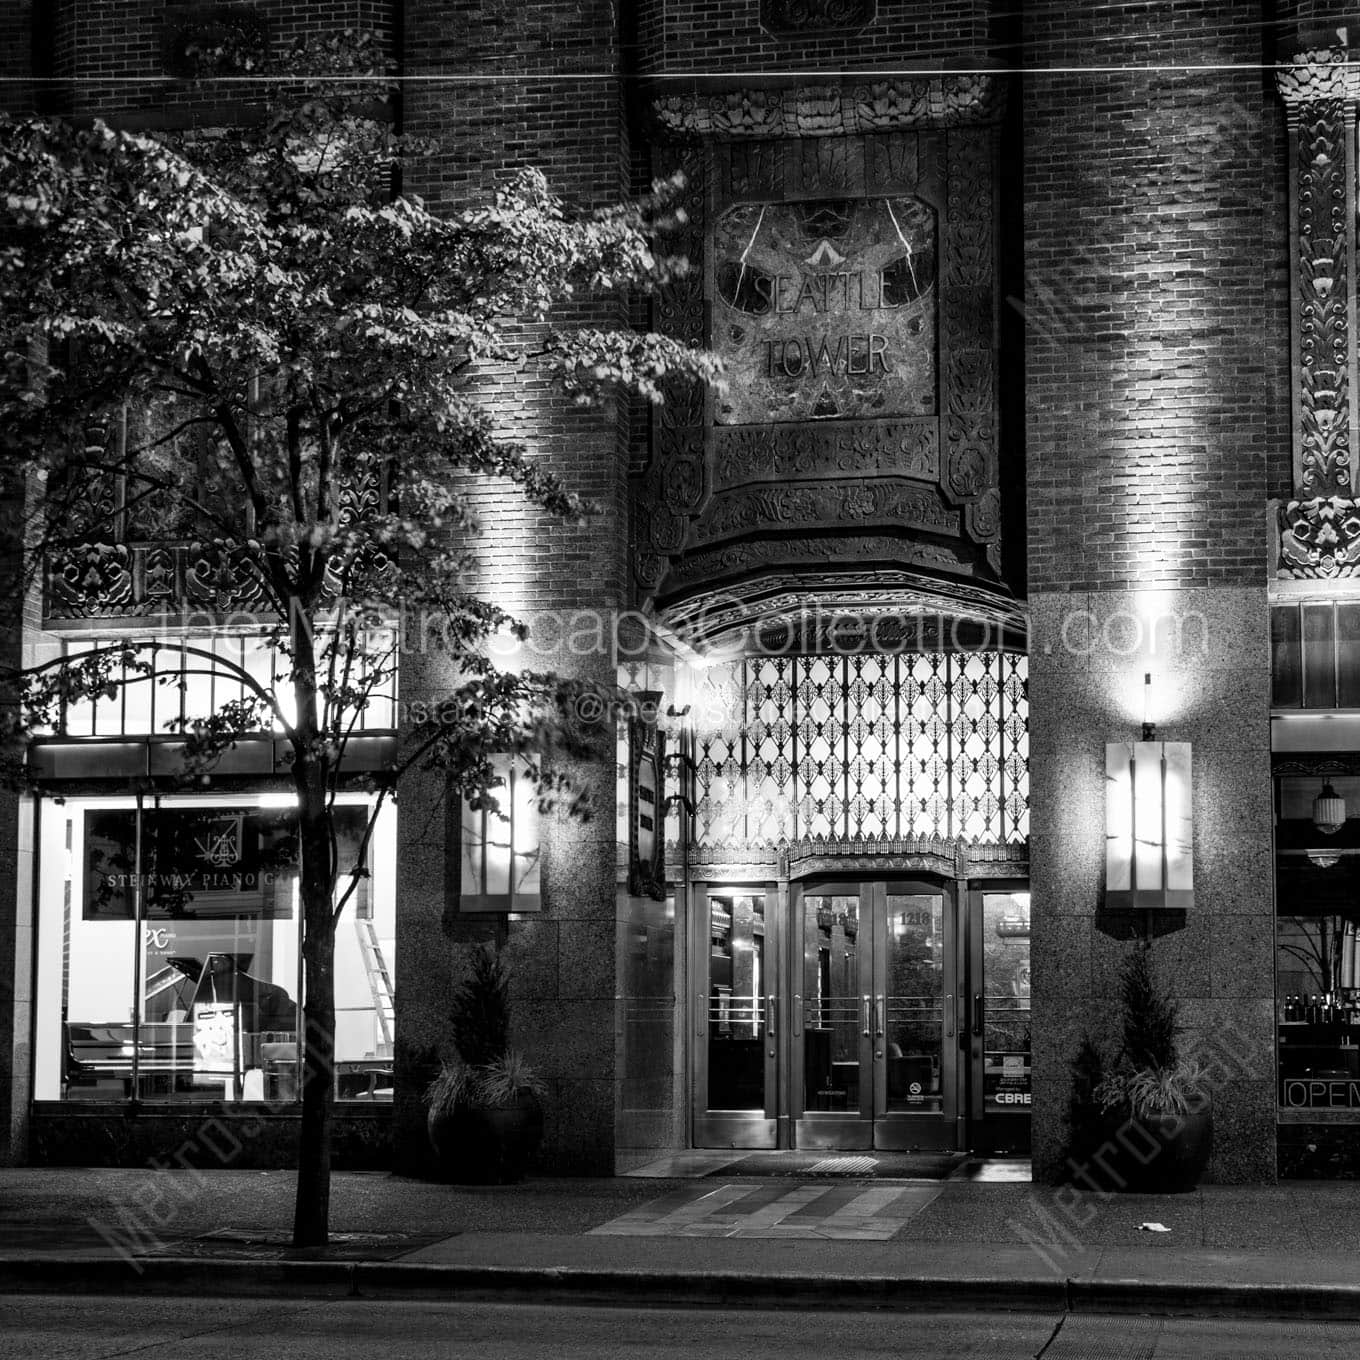 seattle tower at night Black & White Office Art